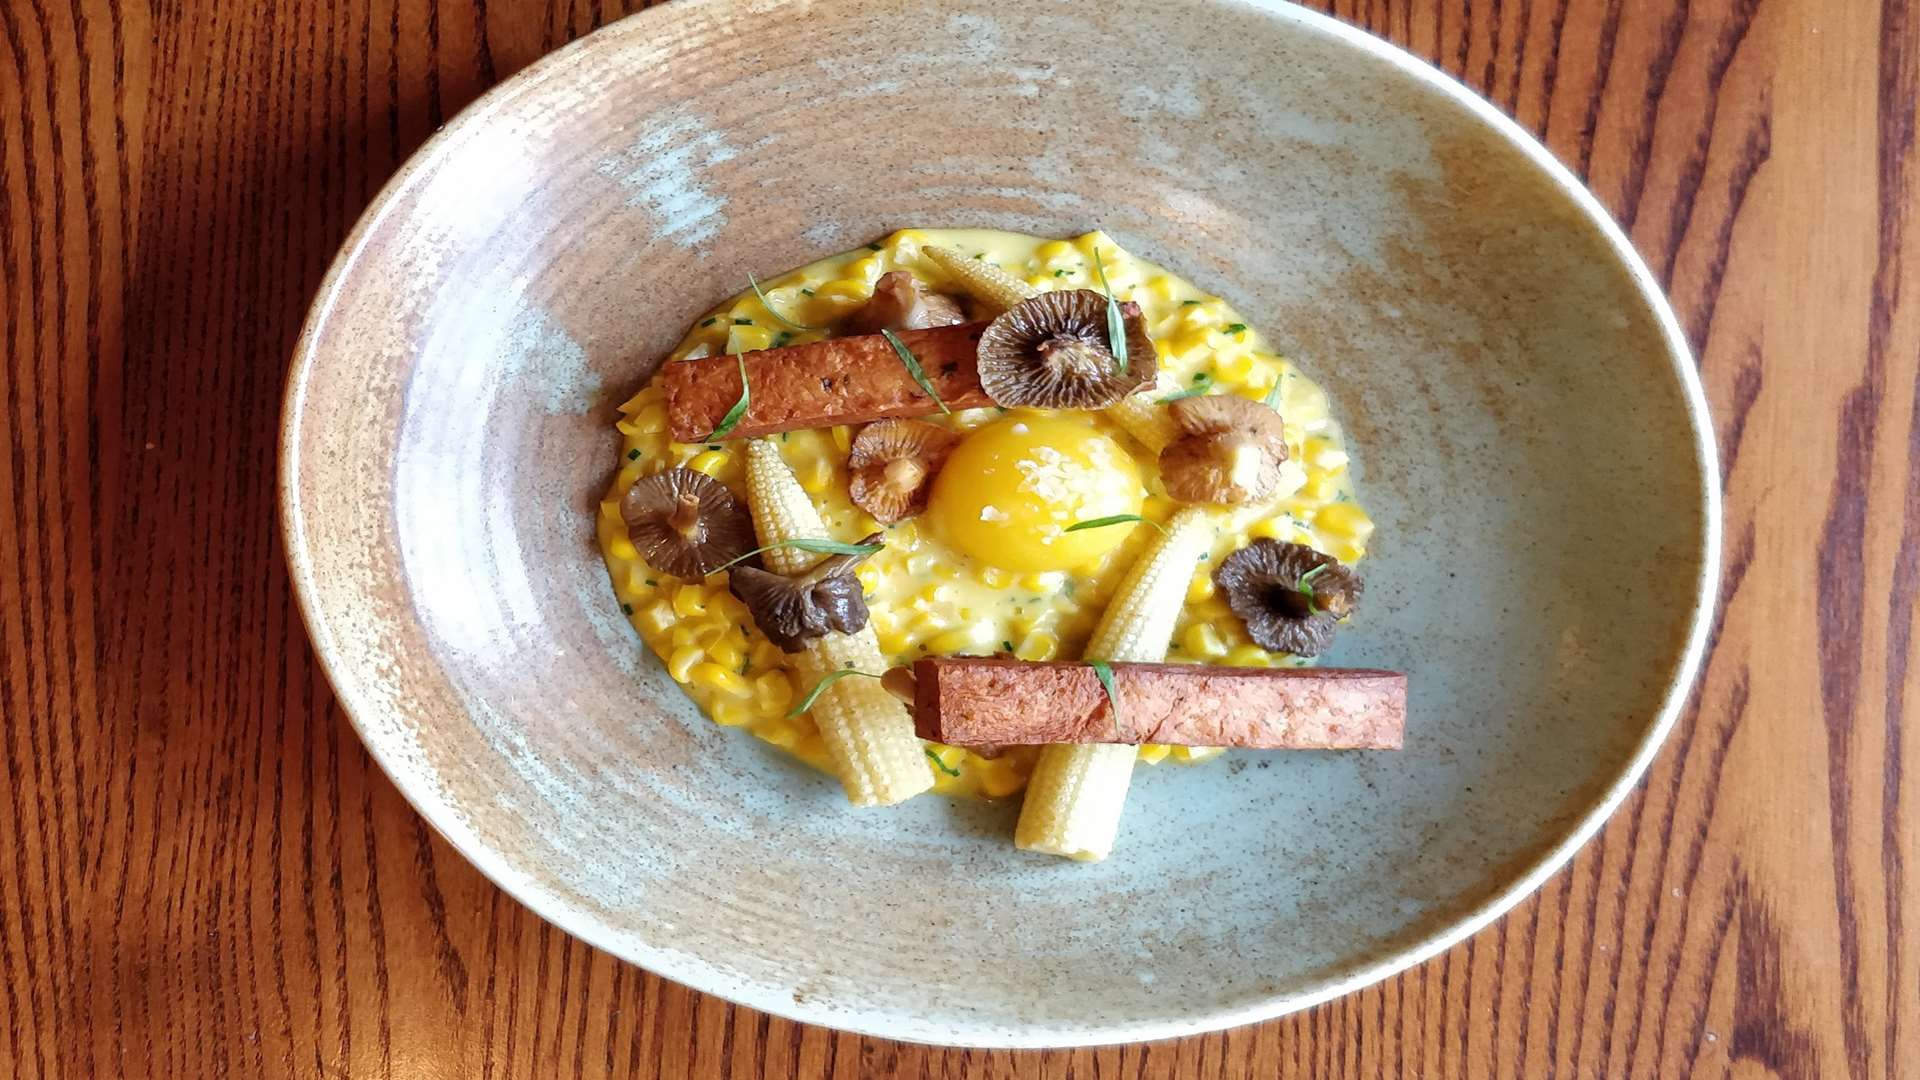 A duck egg dish on the menu